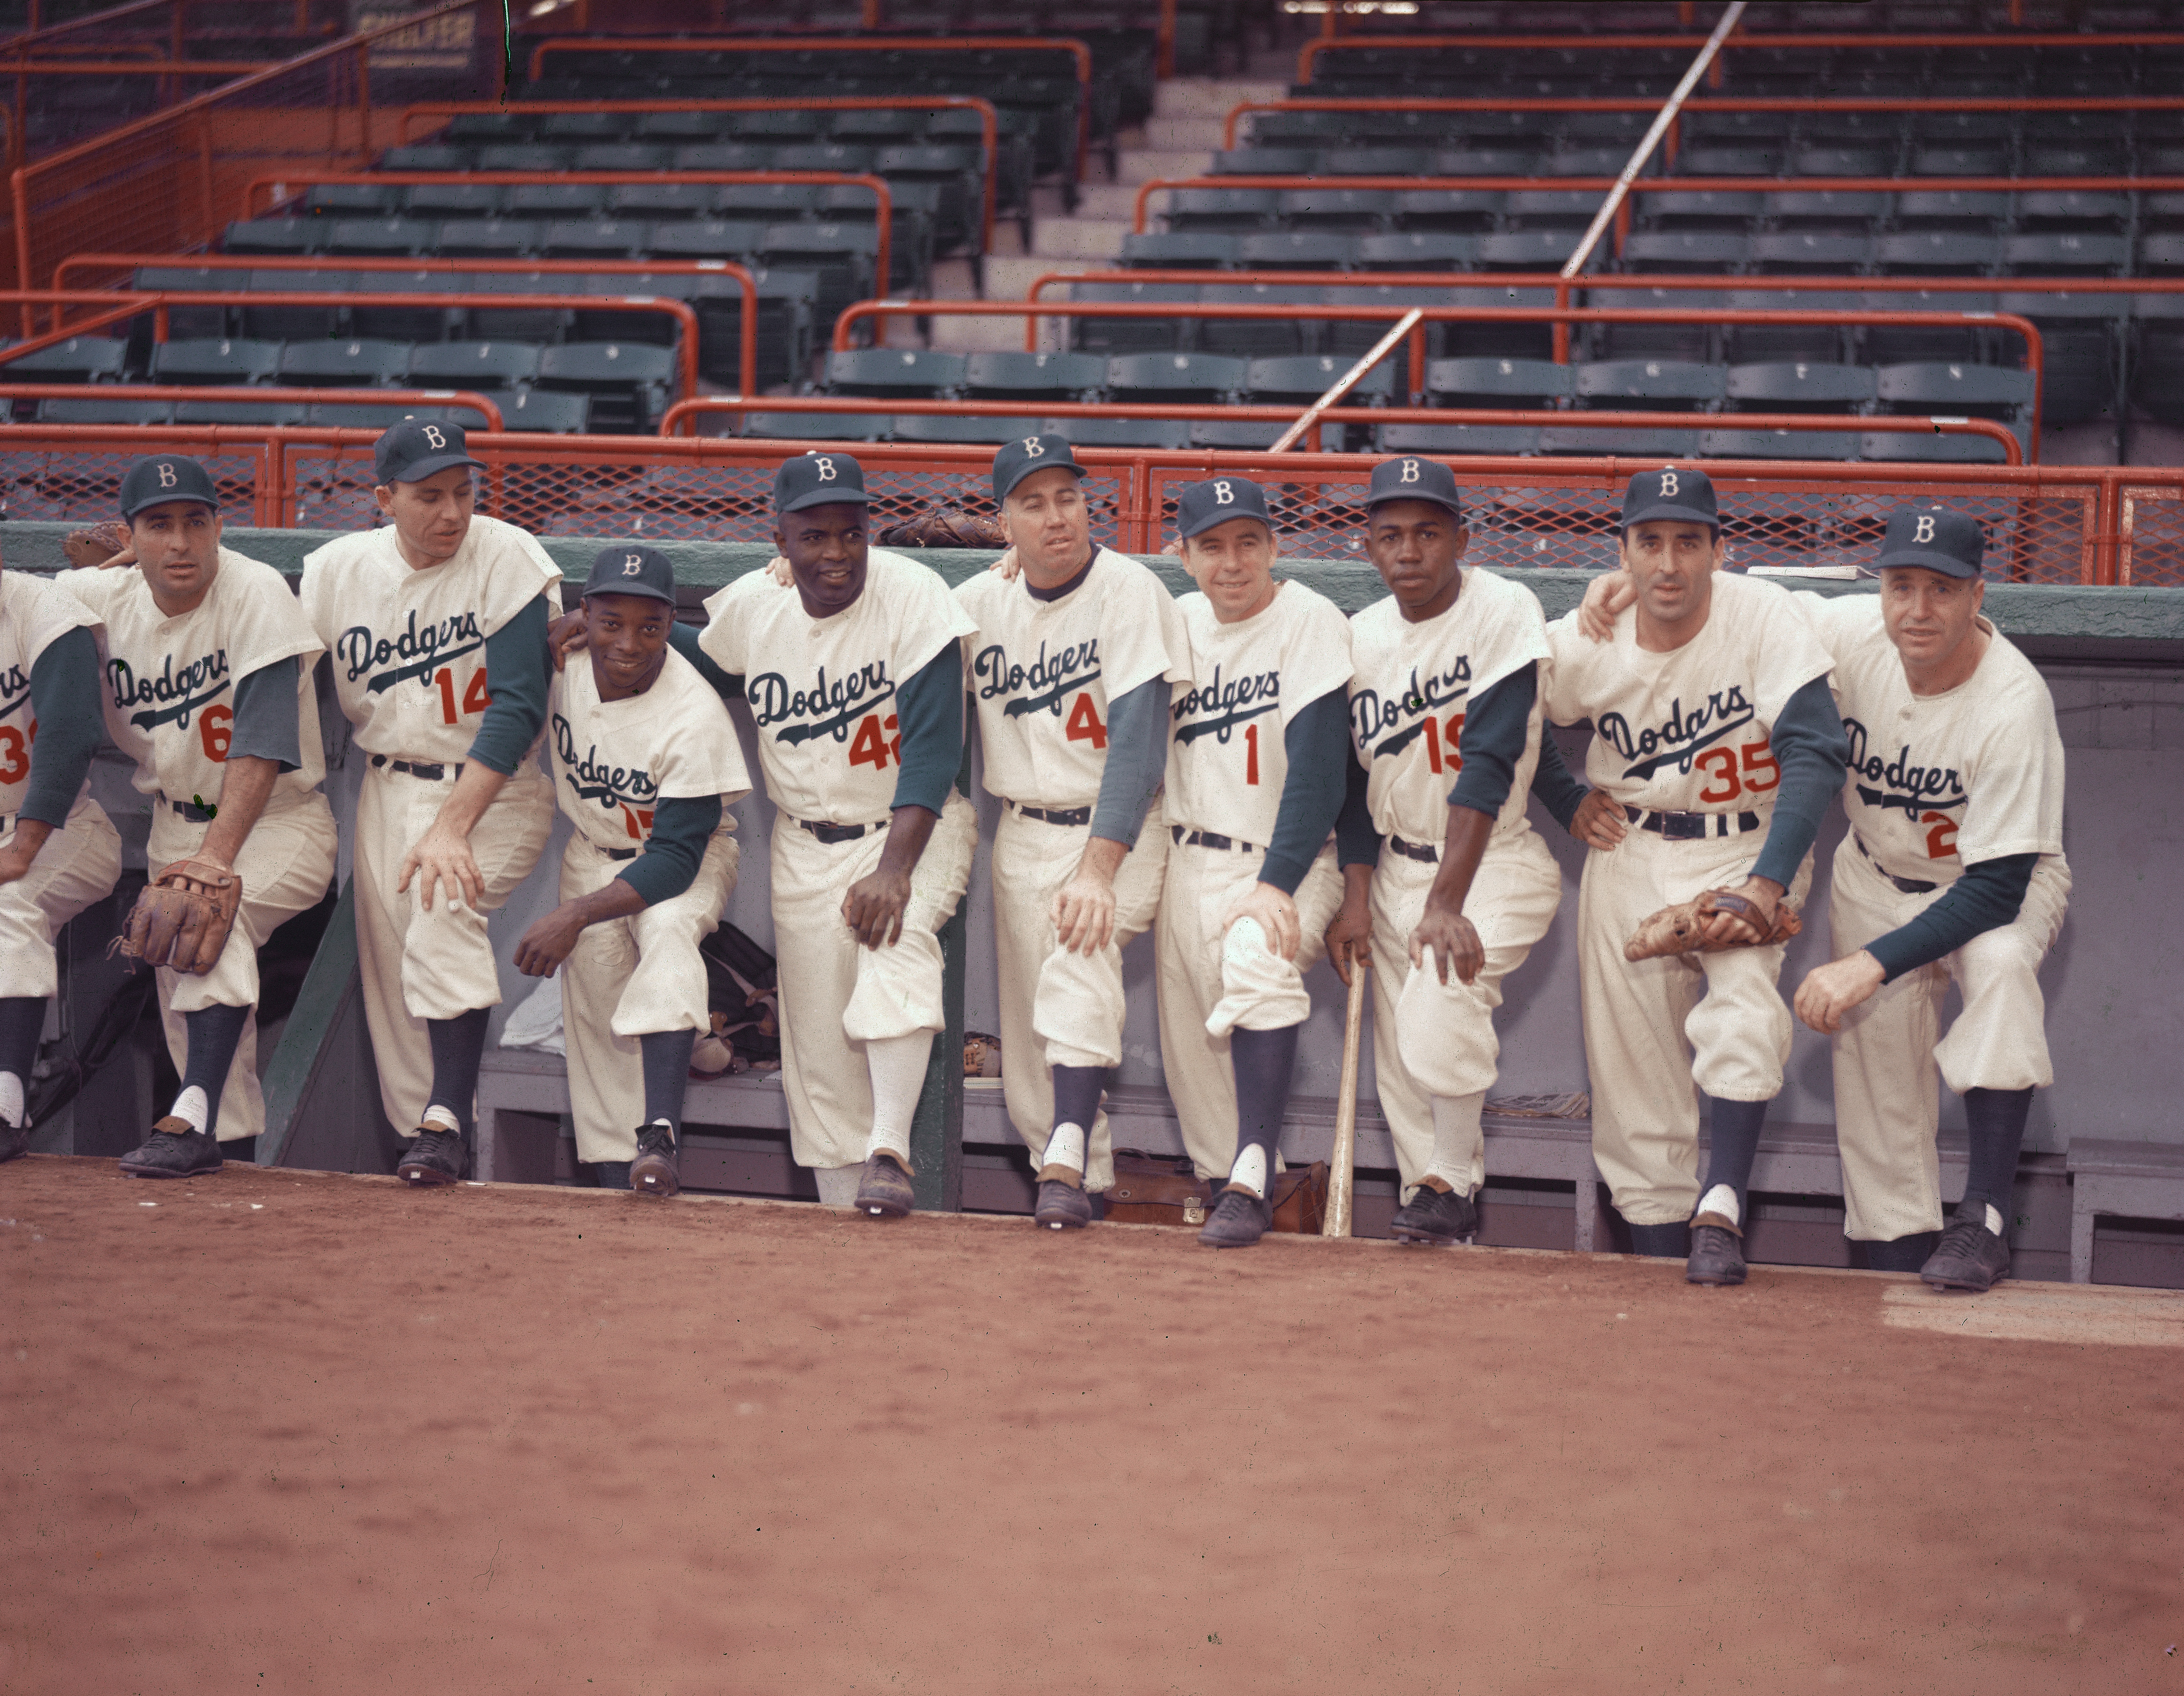 Brooklyn Dodgers in 1954 (Photo by Hulton Archive/Getty Images)